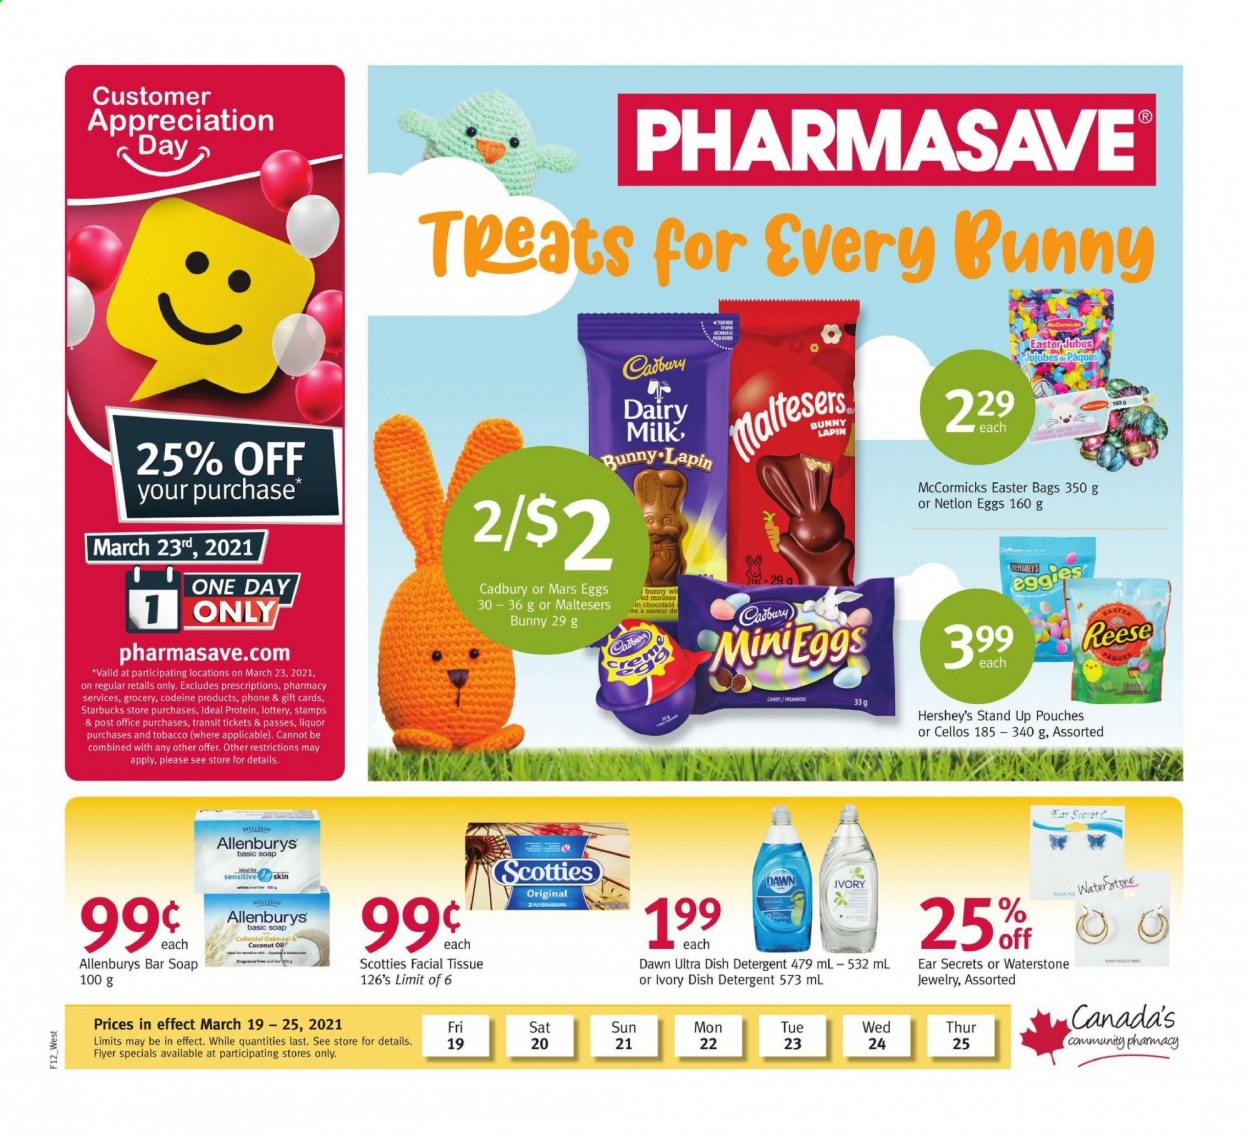 thumbnail - Pharmasave Flyer - March 19, 2021 - March 25, 2021 - Sales products - eggs, Hershey's, chocolate, Mars, Maltesers, Cadbury, Dairy Milk, oatmeal, oil, Starbucks, liquor, tissues, soap bar, soap, jewelry. Page 1.